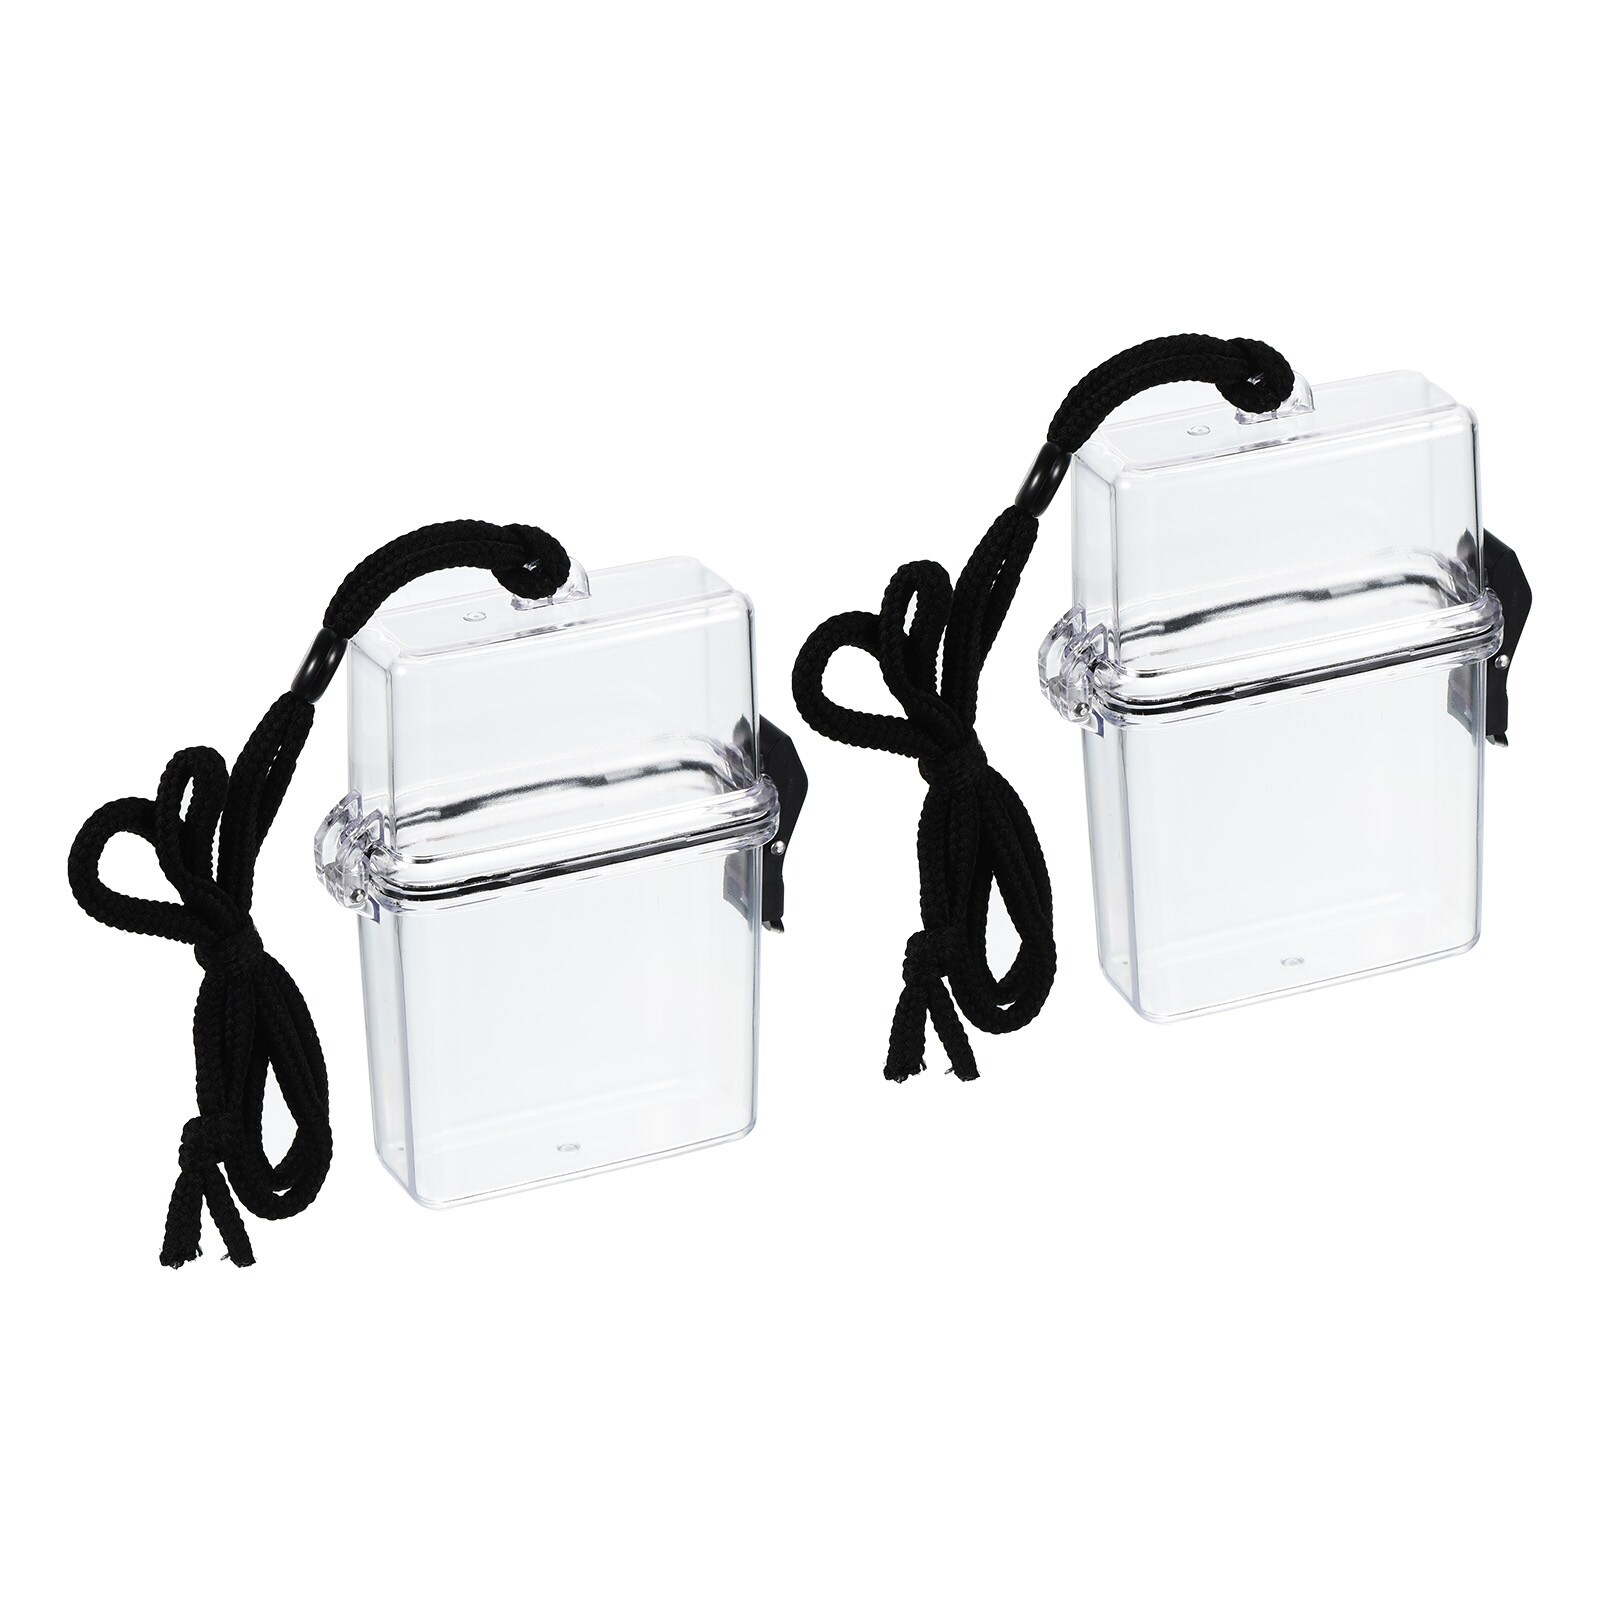 2pcs Waterproof ID Card Badge Holder Floating Sports Case with Lanyard,  White - 11.2cm - Bed Bath & Beyond - 36957674